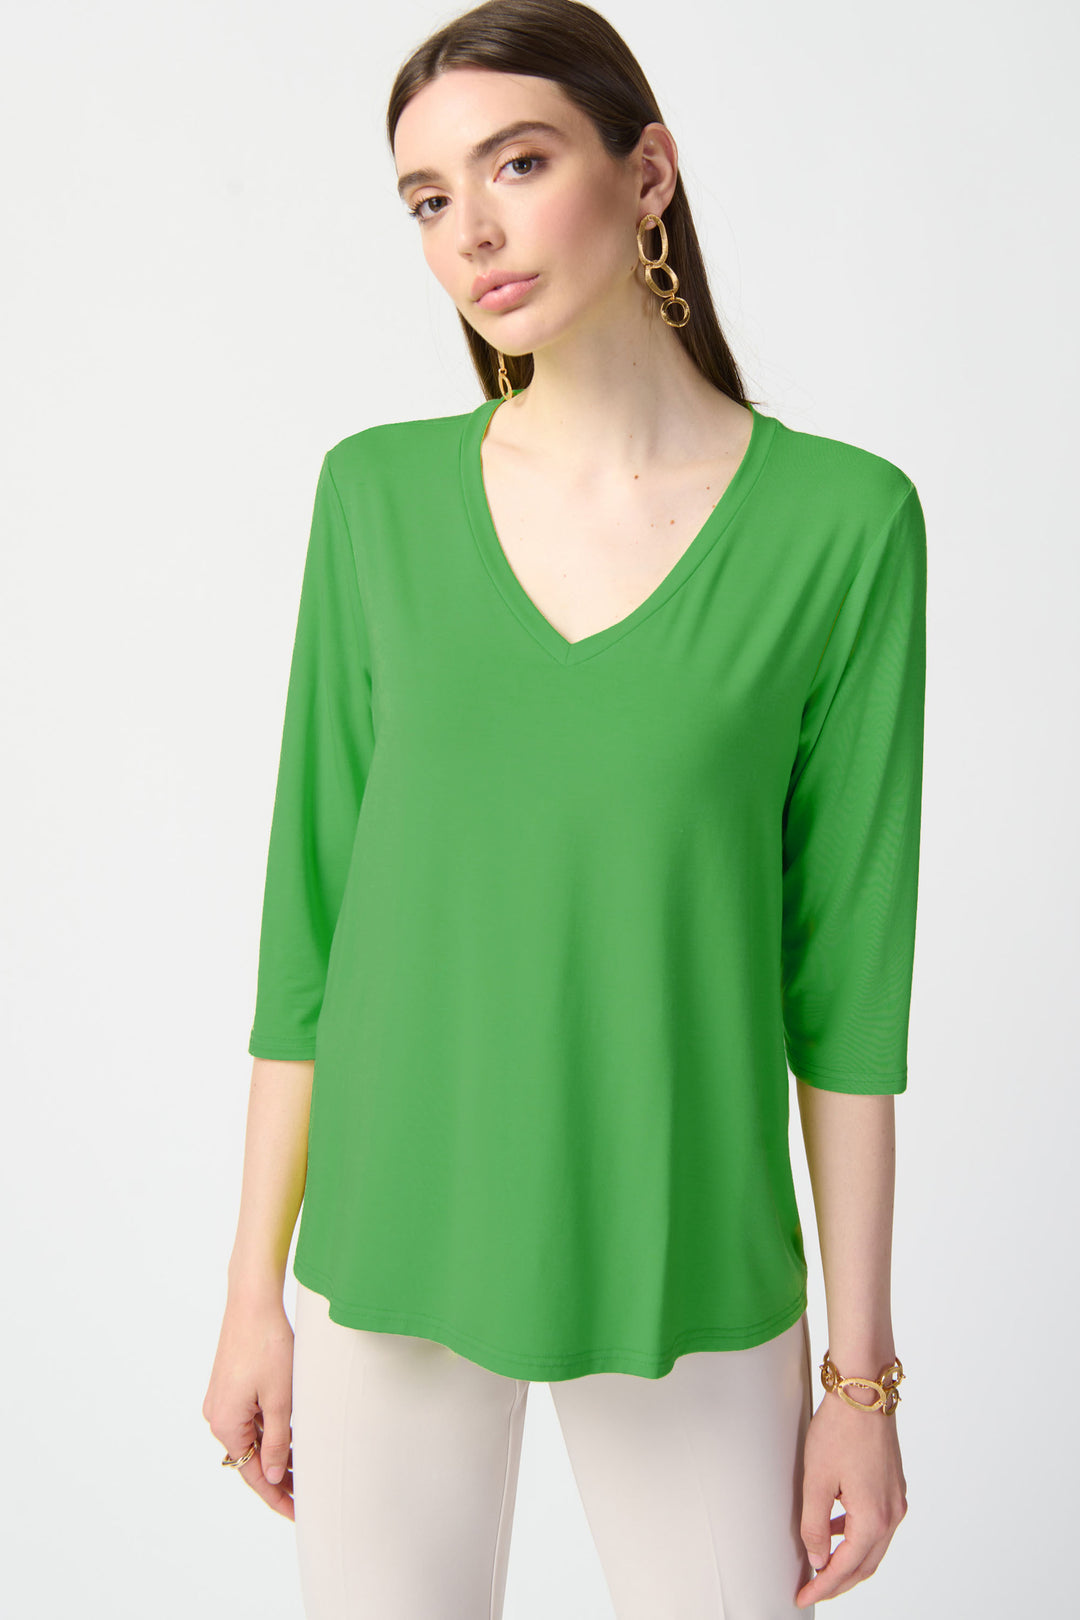 JOSEPH RIBKOFF Spring 2024 With its ultra soft fabric and flattering v-neck, this top is perfect for everyday wear. Its bold colours and free flowing, flexible fit make it versatile for any occasion. 